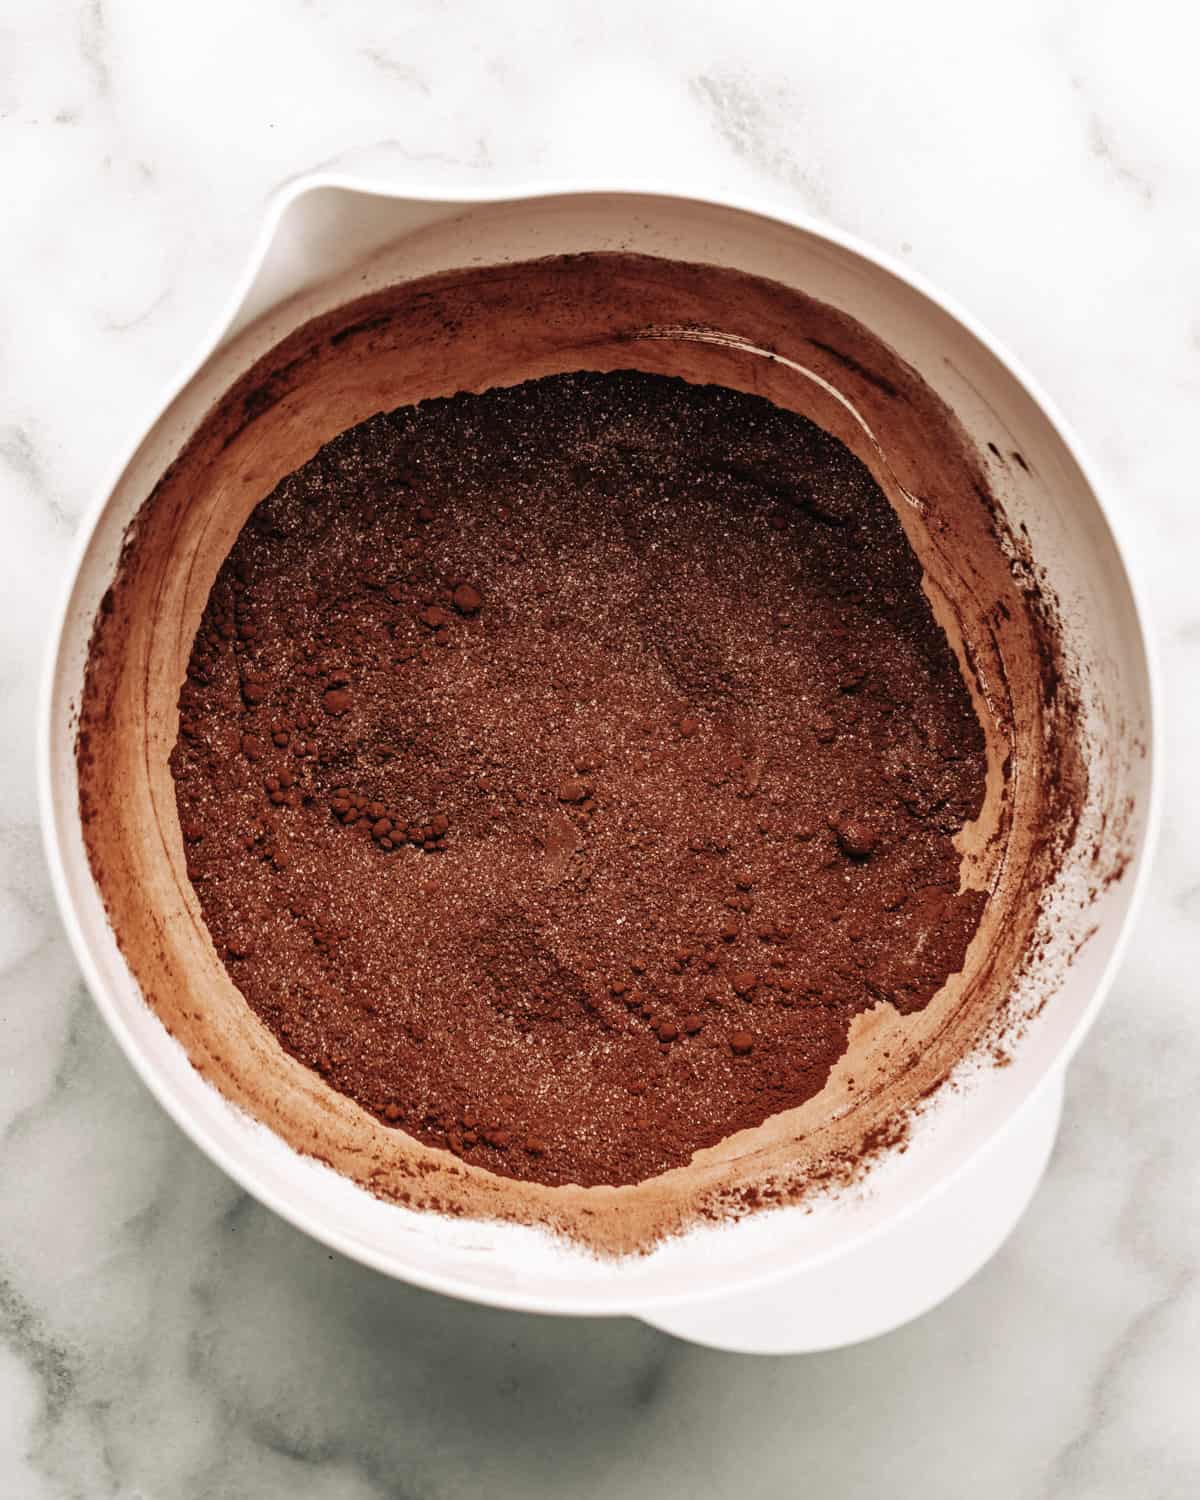 cocoa powder, flour, and sugar in a mixing bowl.